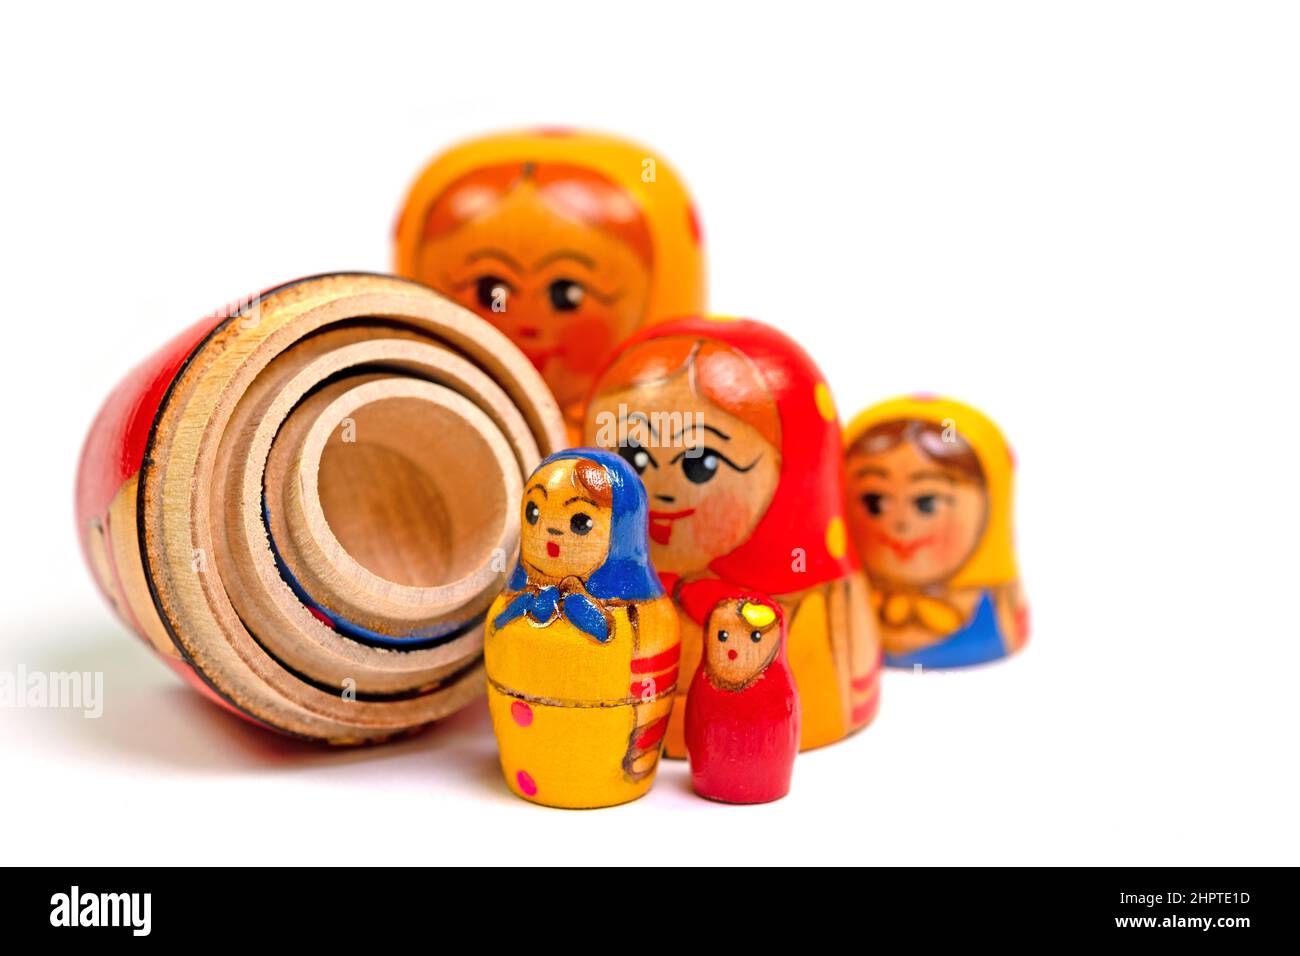 Matryoshka, hand-painted wooden dolls against a white background Stock Photo